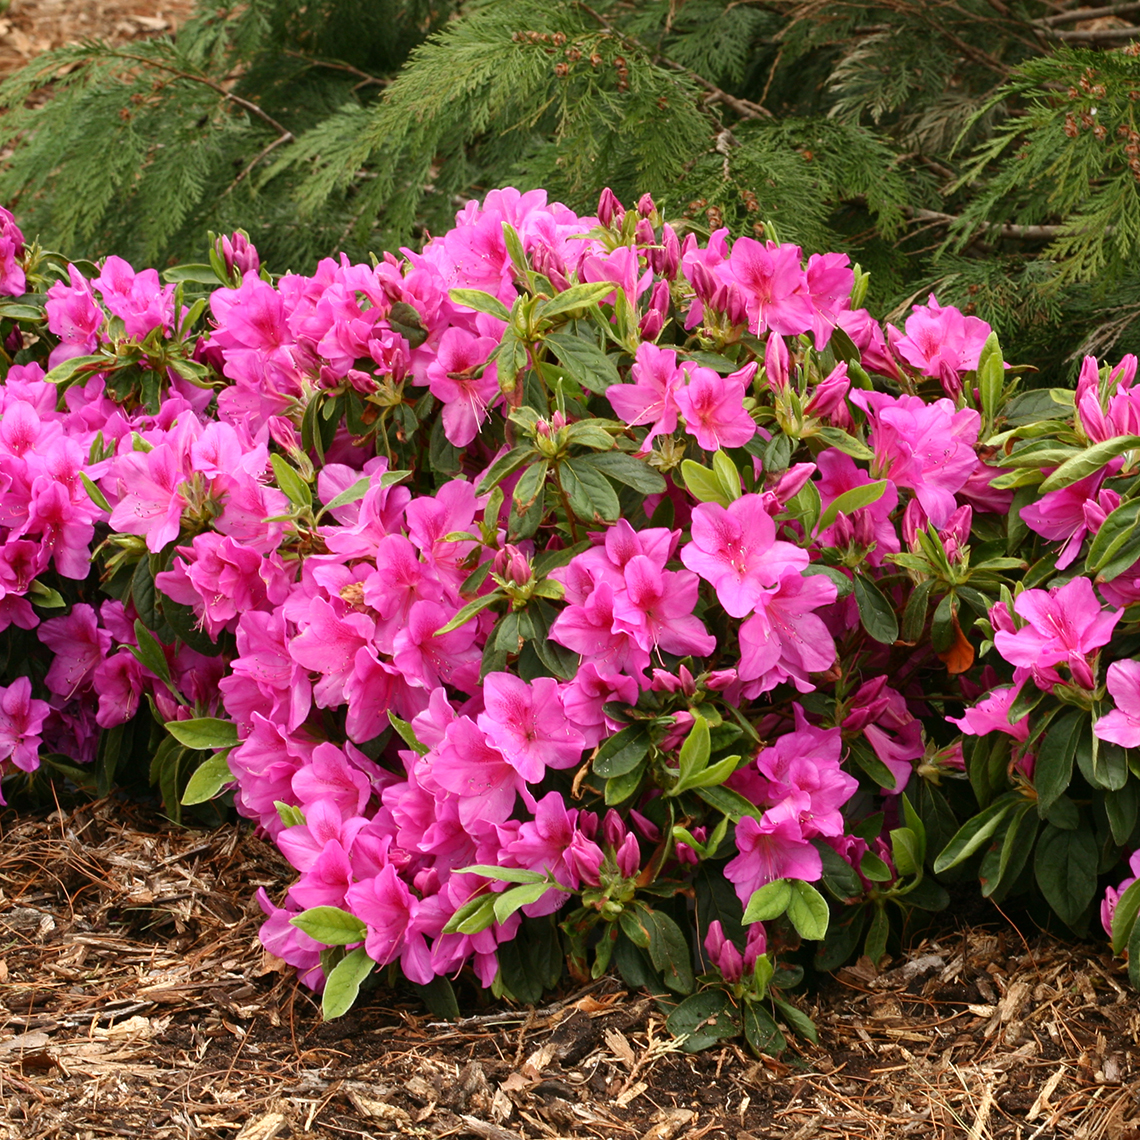 Mounded Bloom-A-Thon Lavender reblooming azalea planted near evergreen